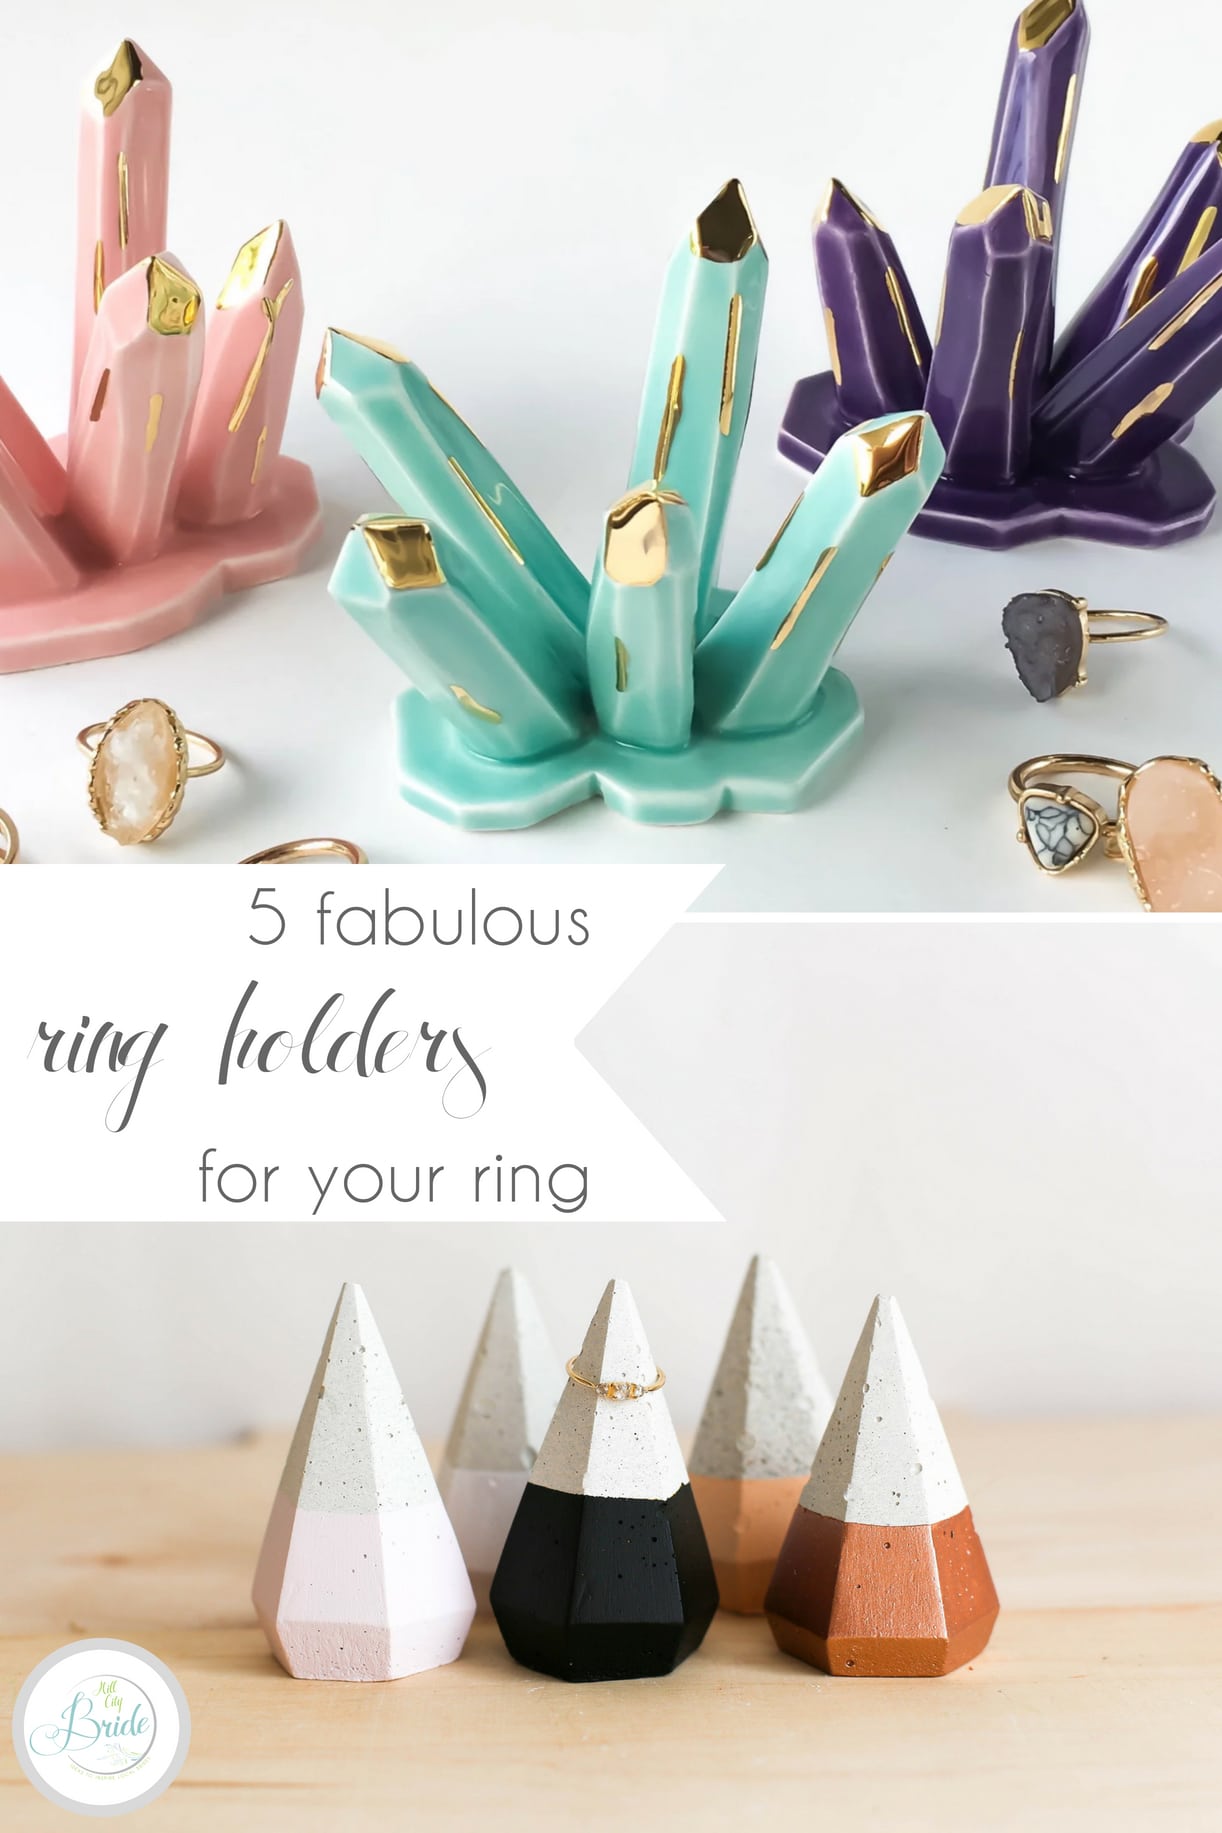 Ring Holders for Your Engagement Ring | Hill City Bride Virginia Wedding Blog